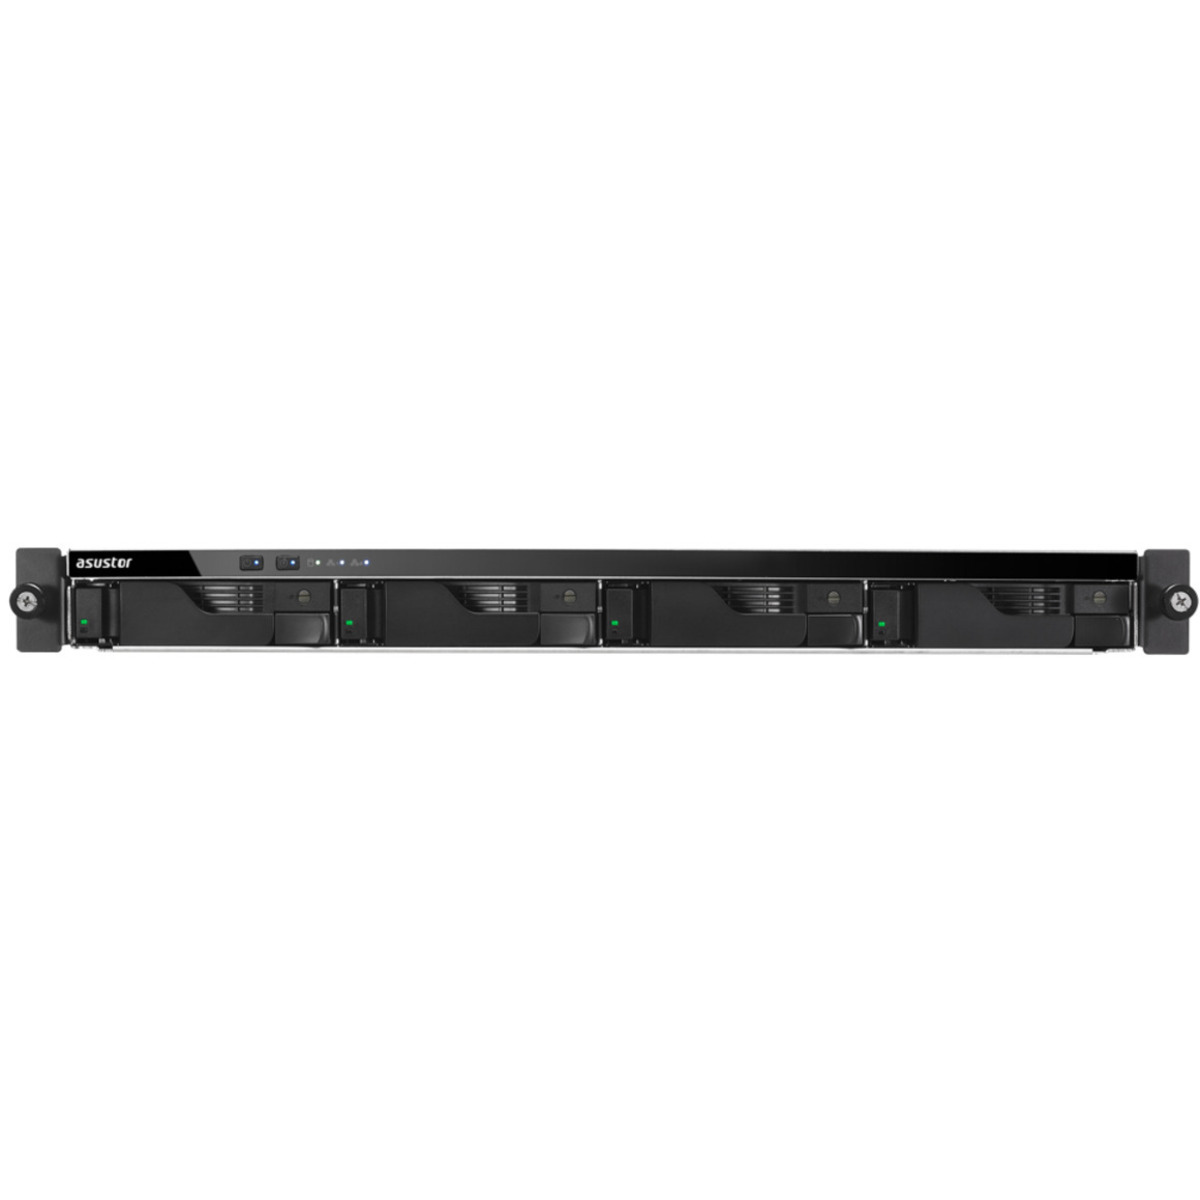 ASUSTOR LOCKERSTOR 4RS AS6504RS 8tb 4-Bay RackMount Multimedia / Power User / Business NAS - Network Attached Storage Device 4x2tb Samsung 870 QVO MZ-77Q2T0 2.5 560/530MB/s SATA 6Gb/s SSD CONSUMER Class Drives Installed - Burn-In Tested - FREE RAM UPGRADE LOCKERSTOR 4RS AS6504RS